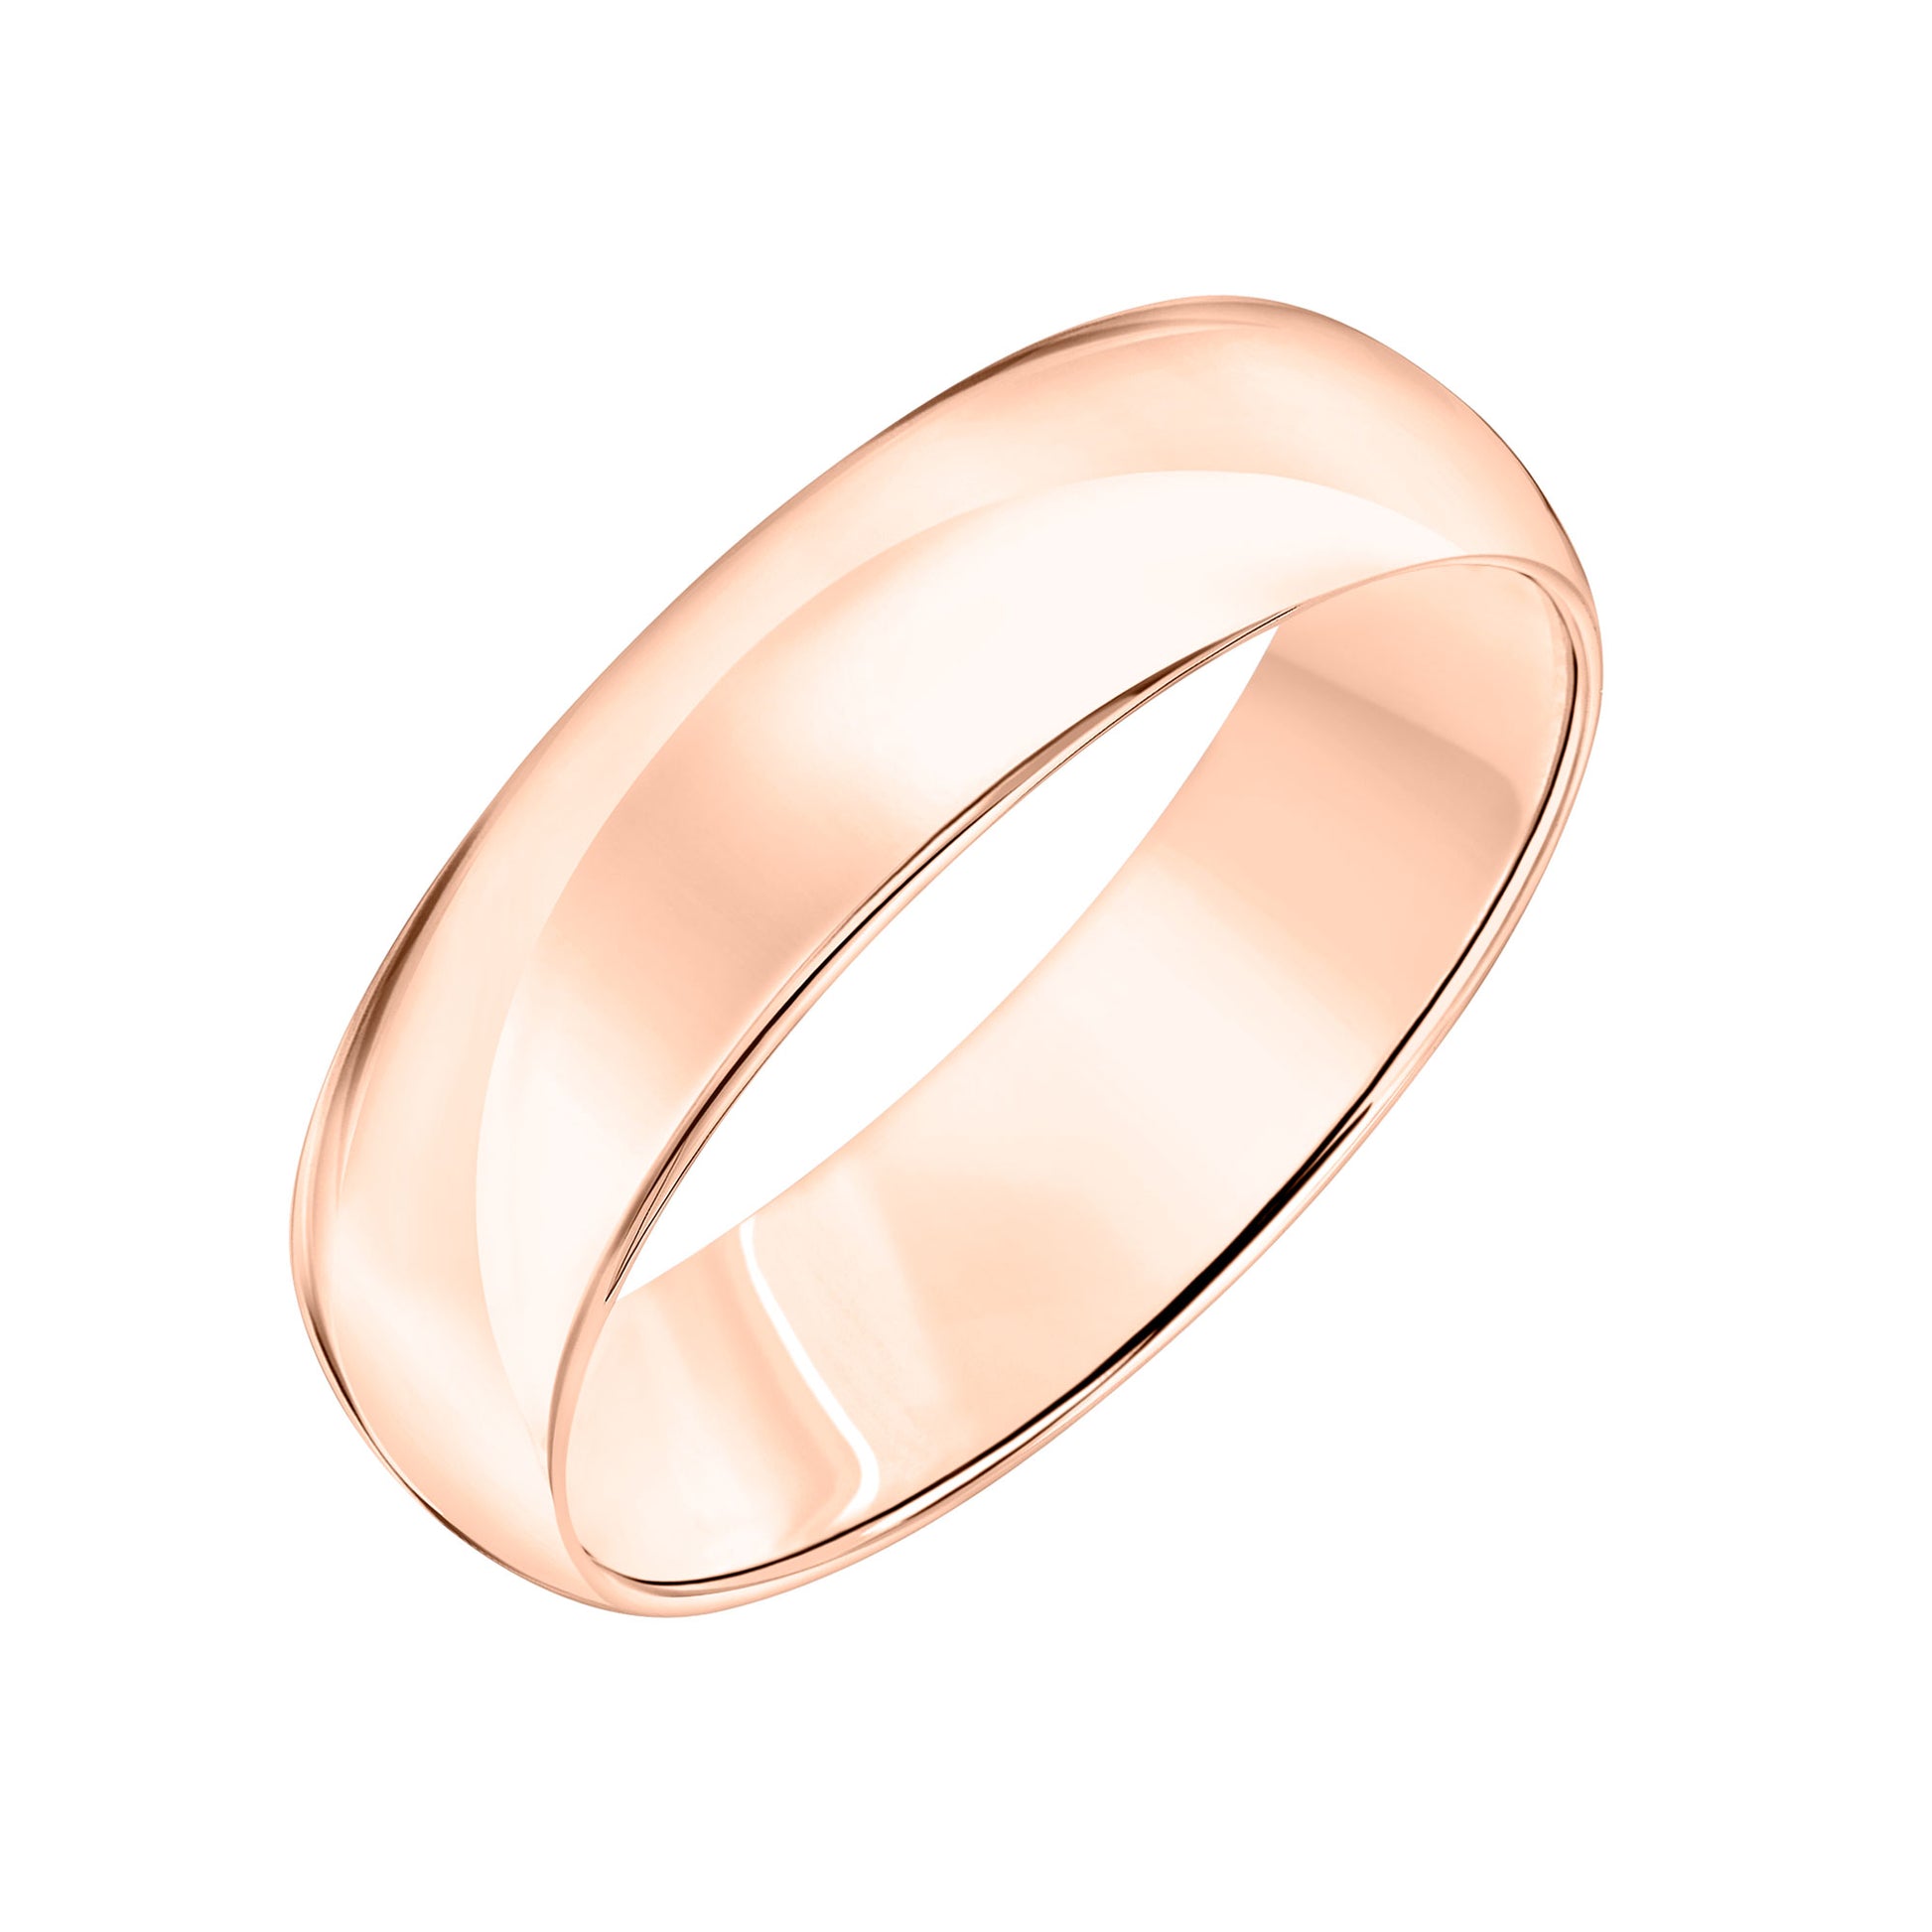 Roux 6mm Light Low Dome Wedding Ring